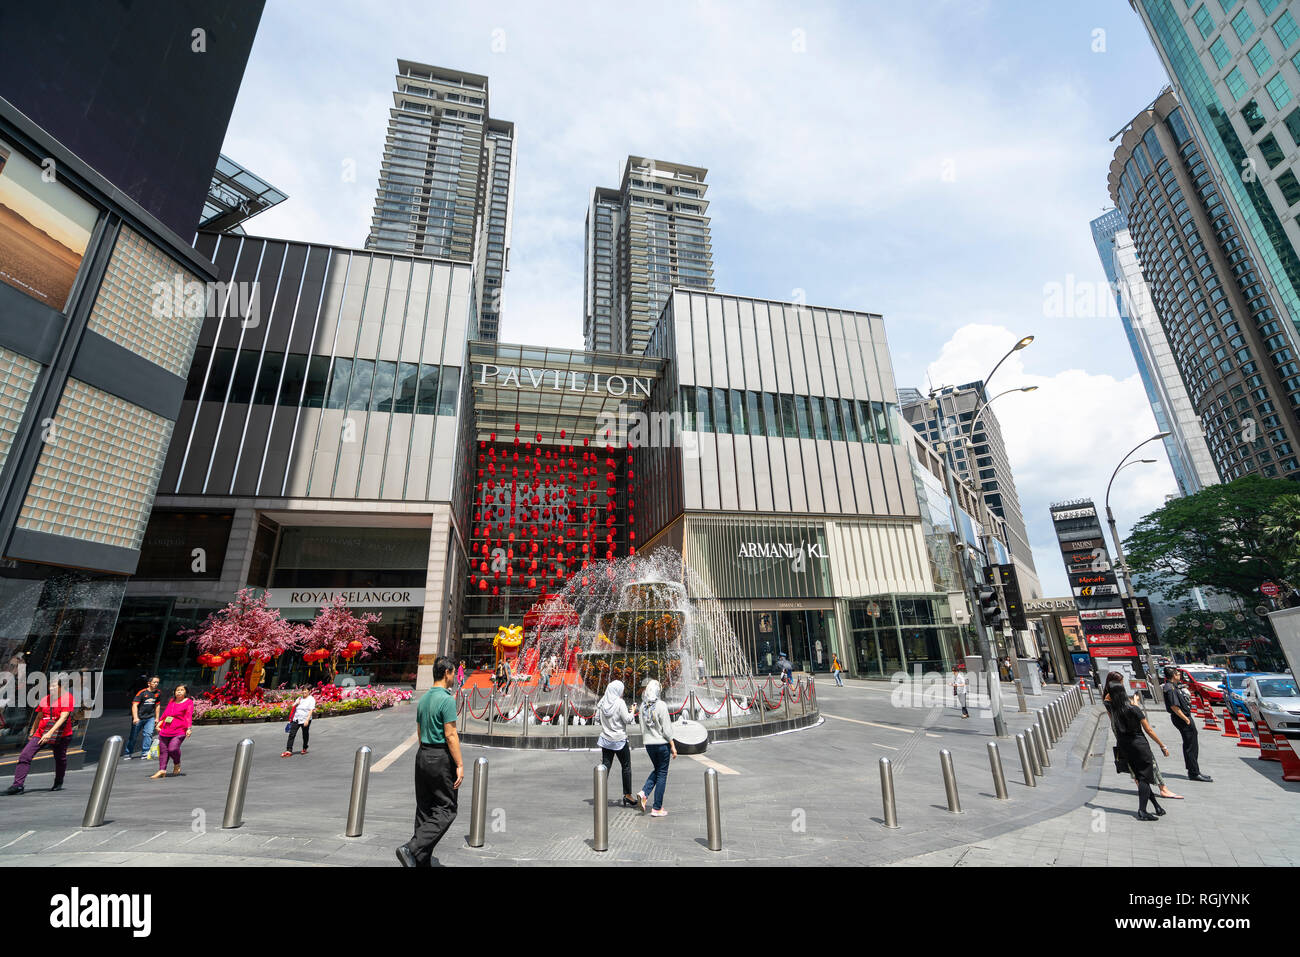 A view of  Pavilion mall building in Kuala Lumpur, Malaysia Stock Photo